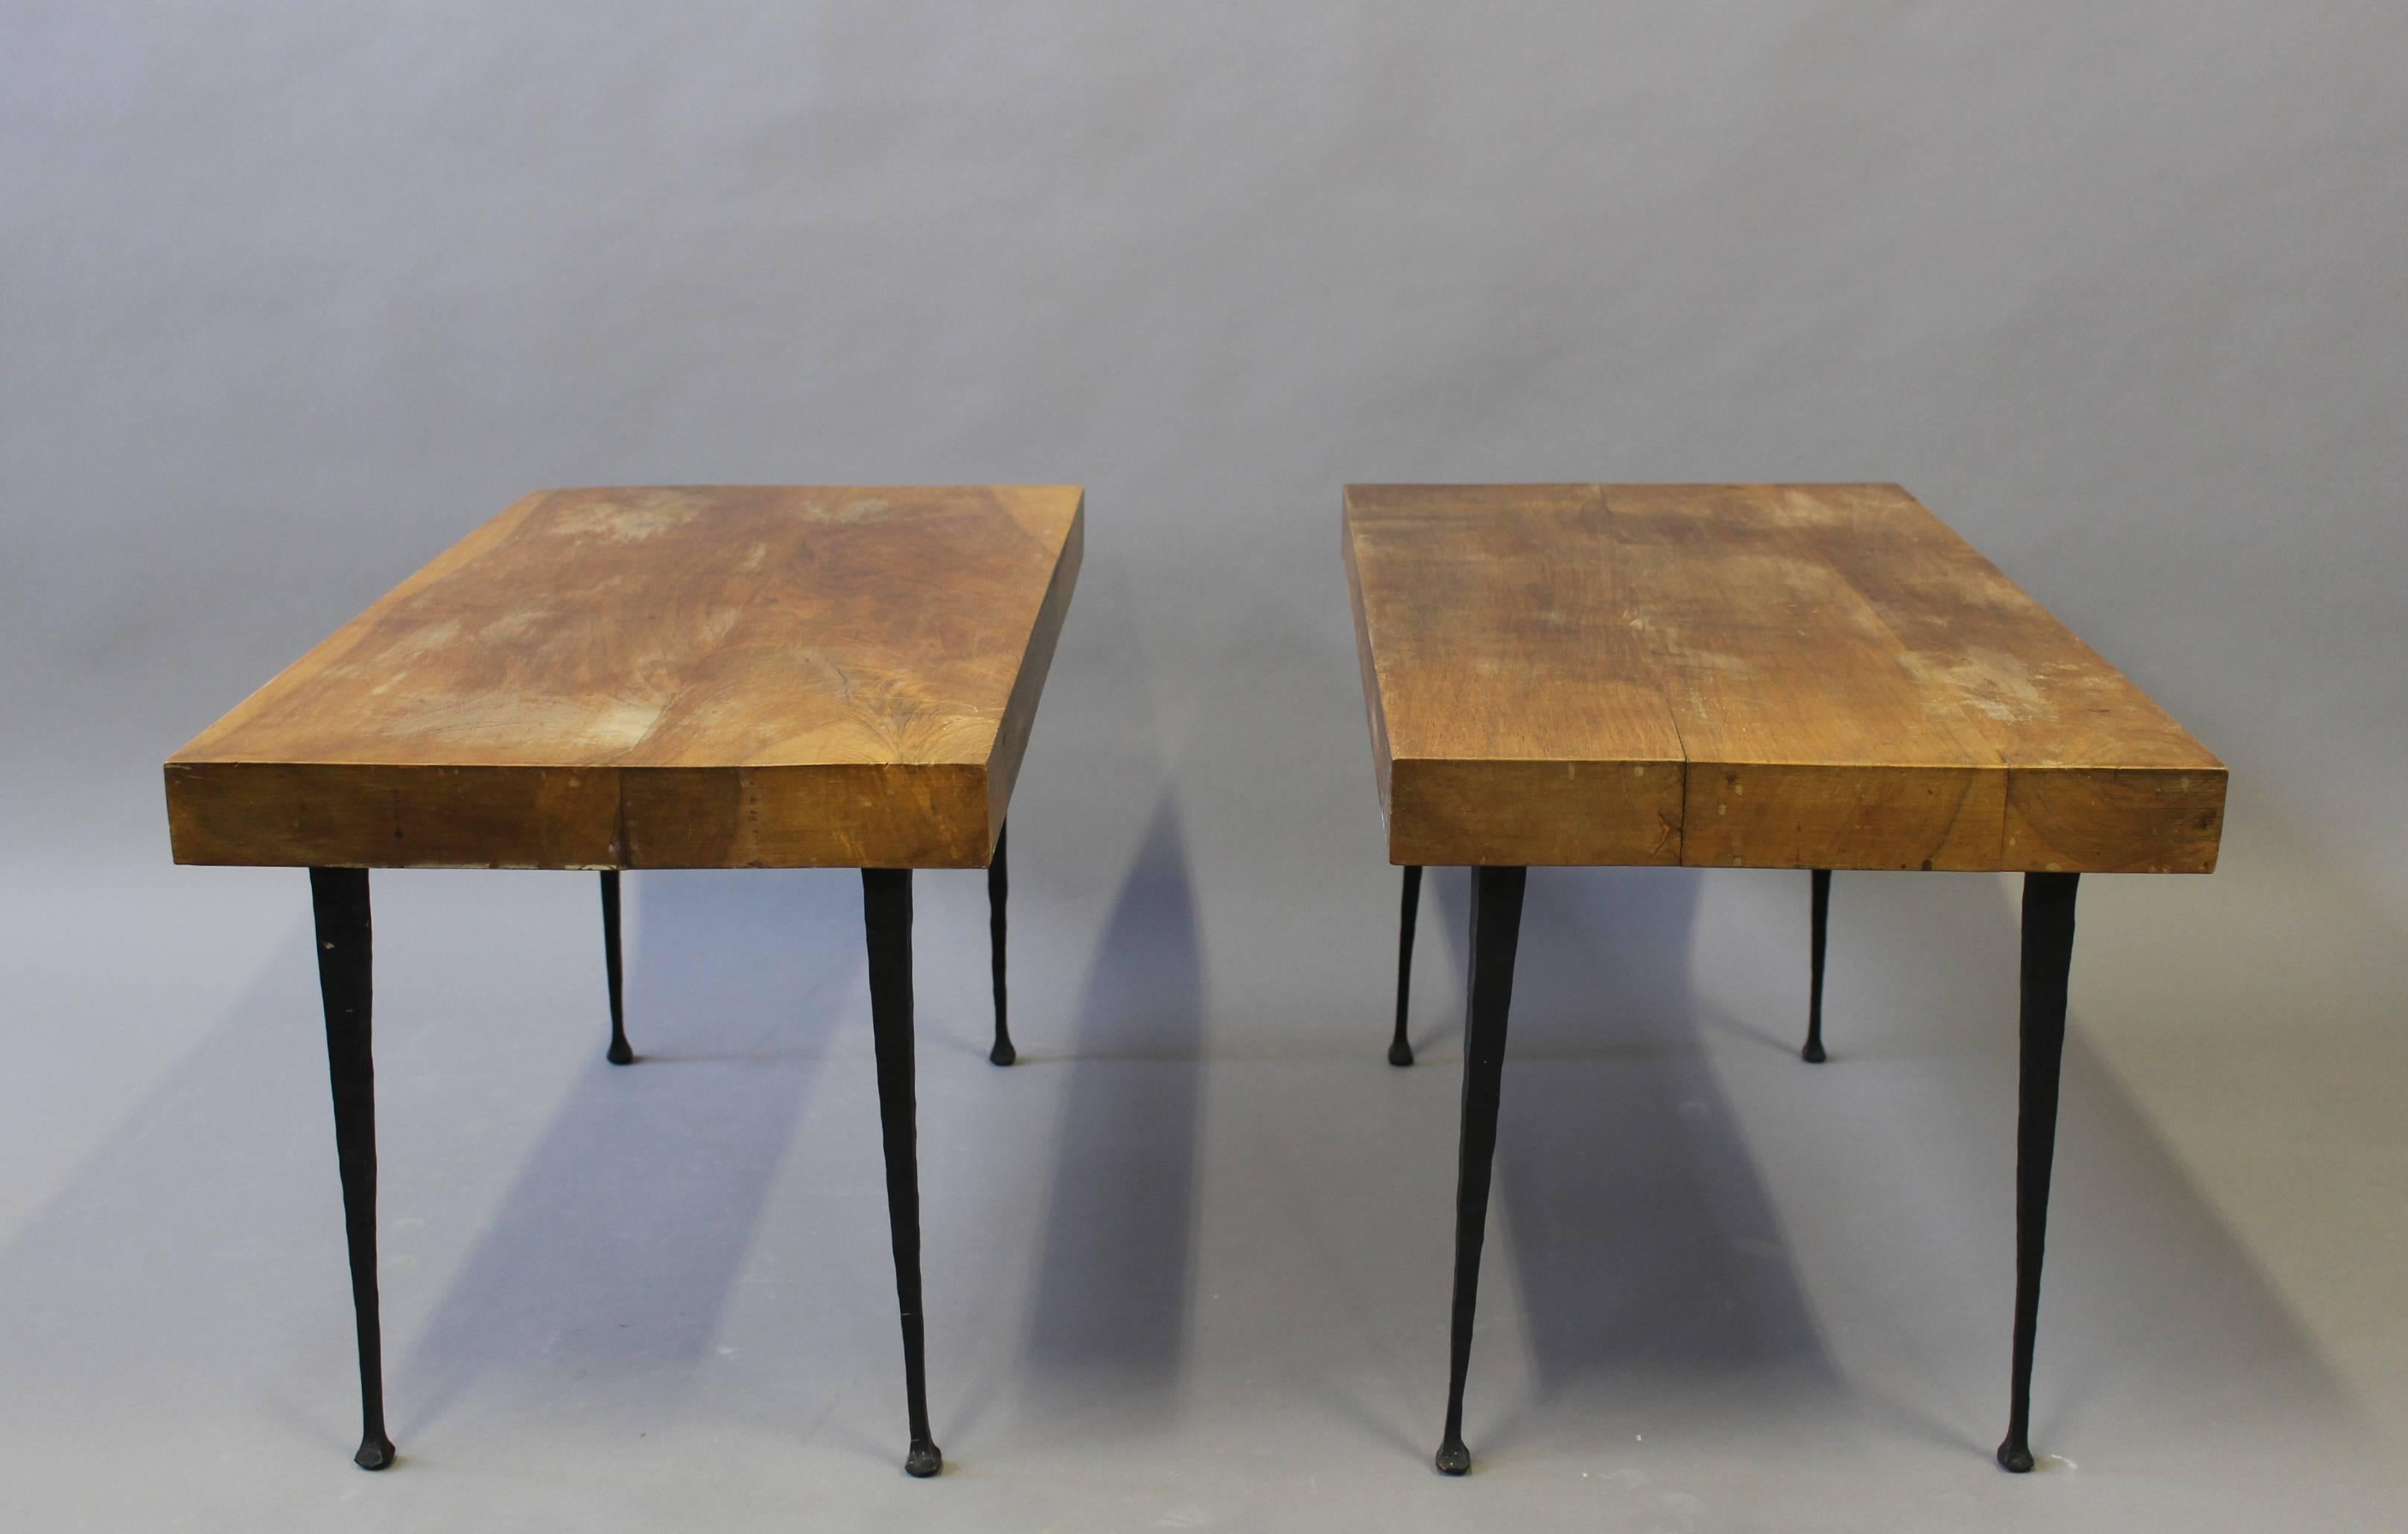 A pair of fine French Art Deco wrought iron legs coffee table with solid walnut tops. Might be used as small benches or stool.
Signed on leg (unknown by us).

             